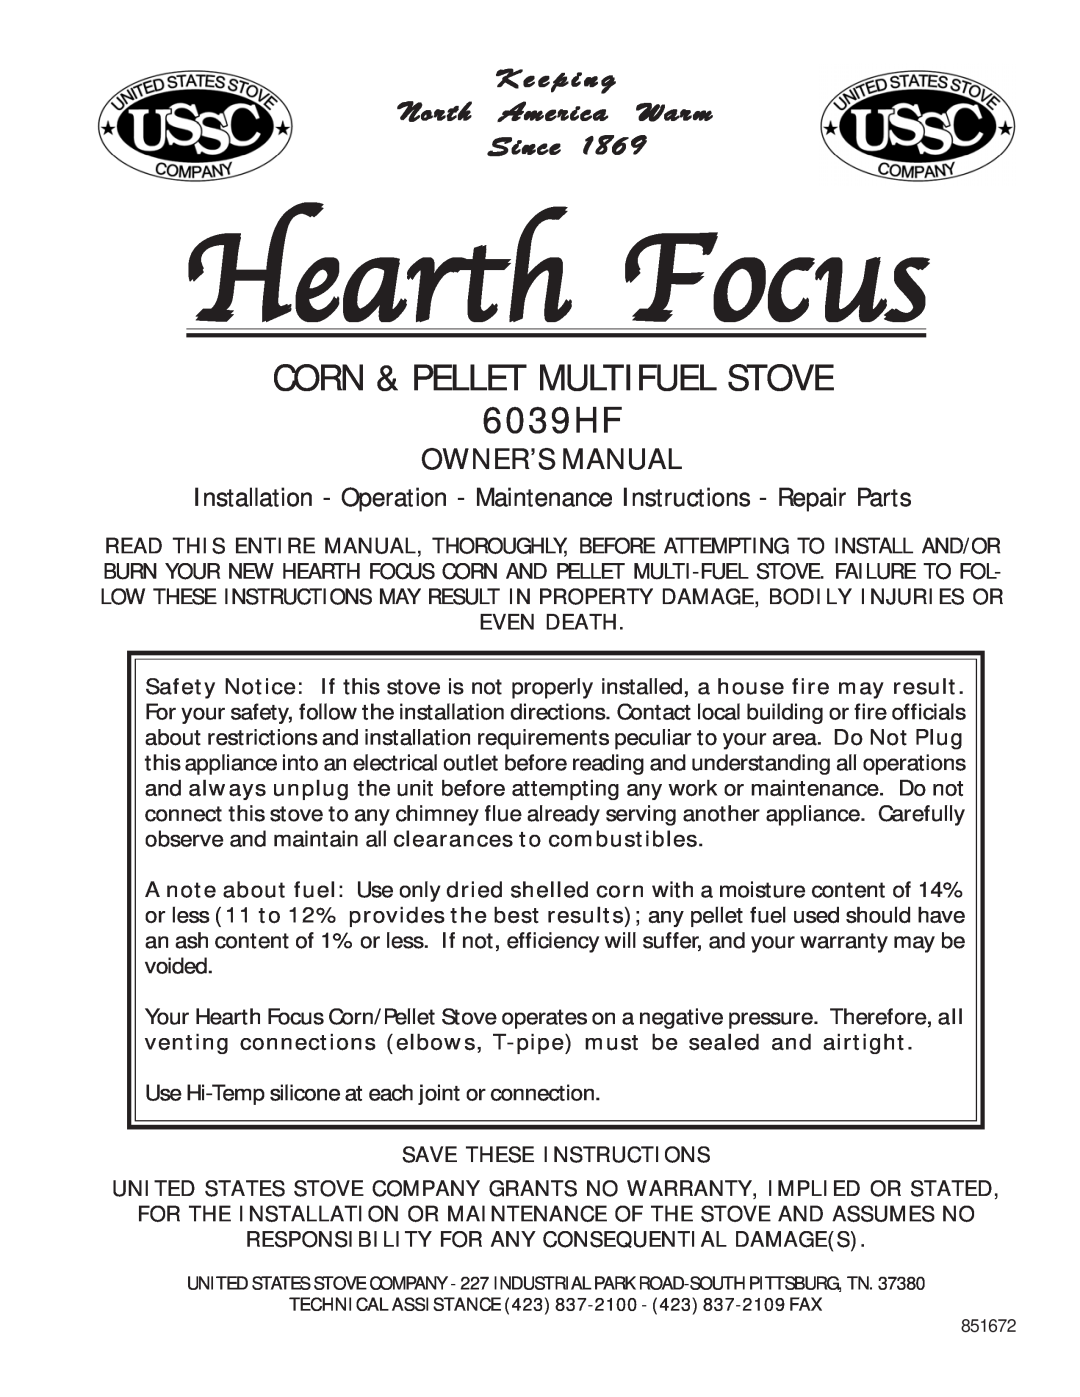 United States Stove 6039HF owner manual Hearth Focus, Corn & Pellet Multifuel Stove, Save These Instructions 